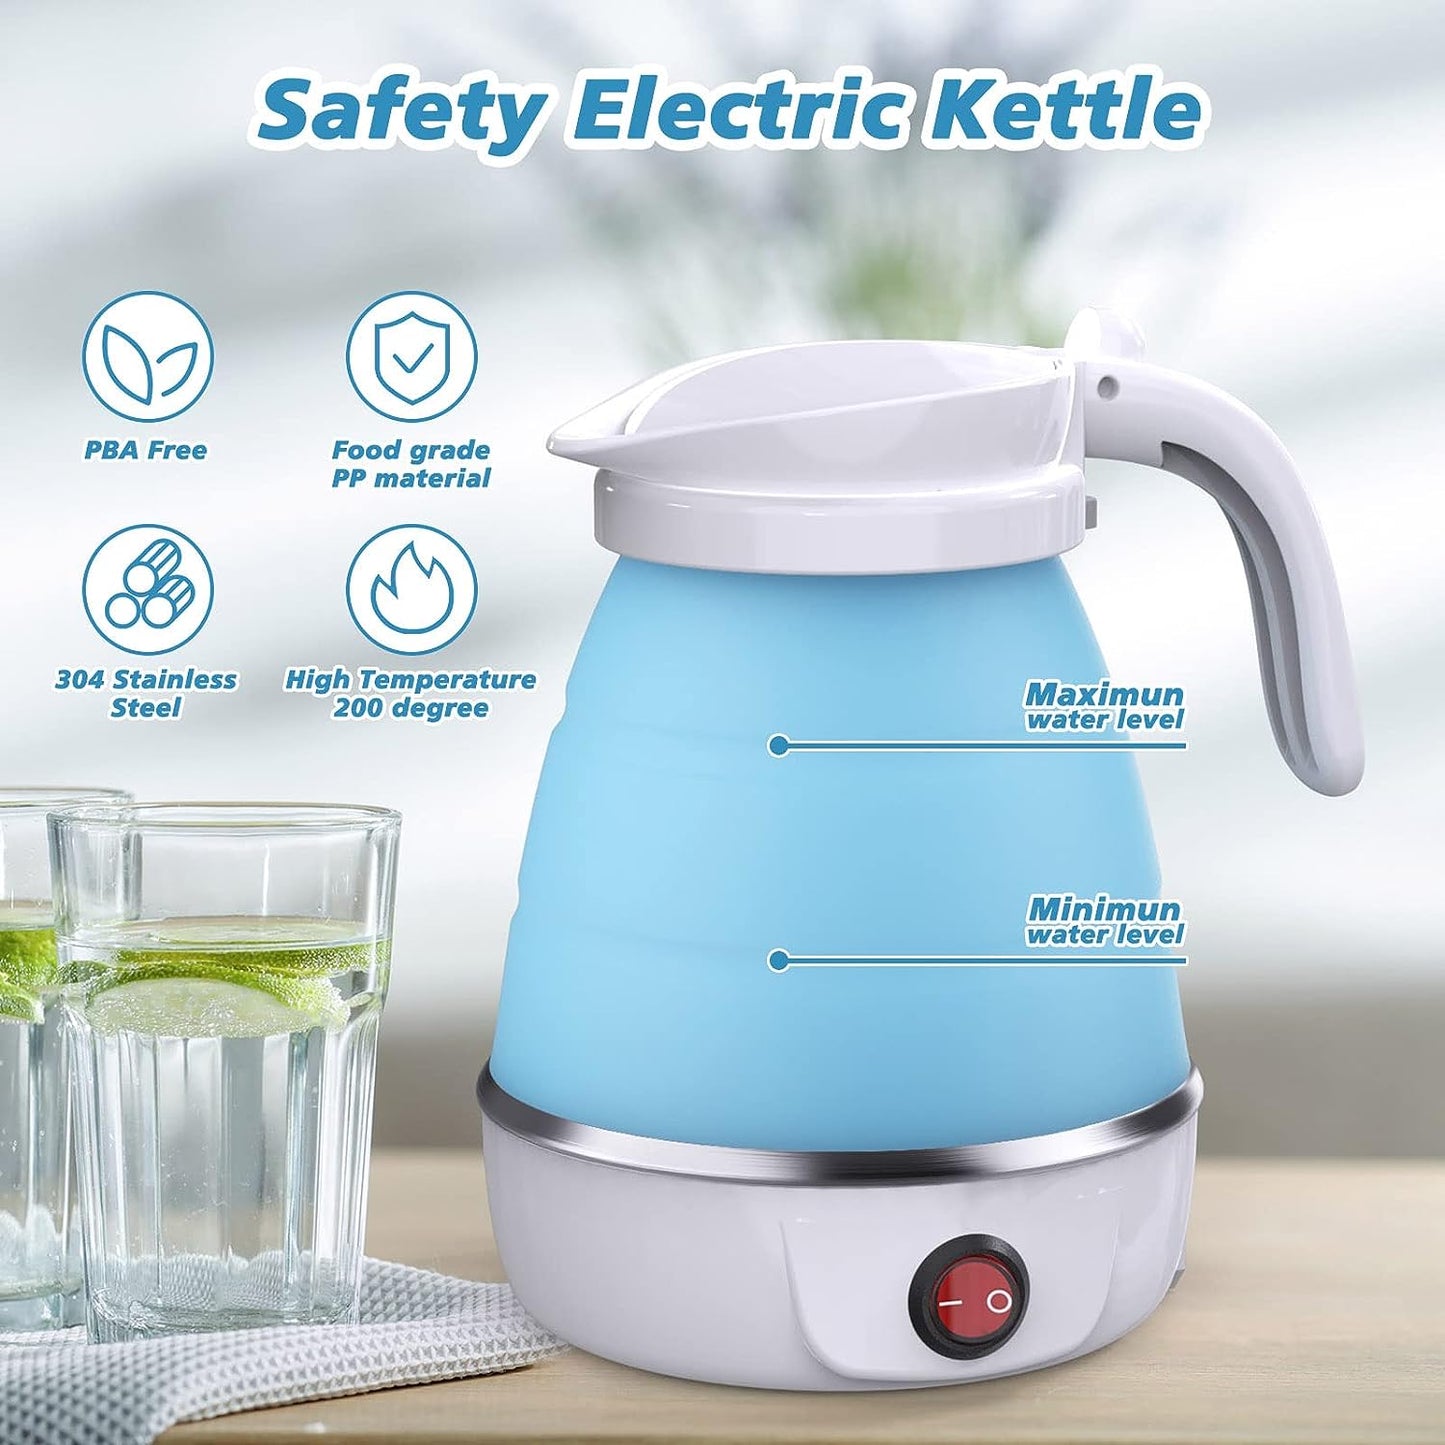 20 oz max (600ml) Foldable Electric Kettle, Camping Kettle, Mini Travel Kettle